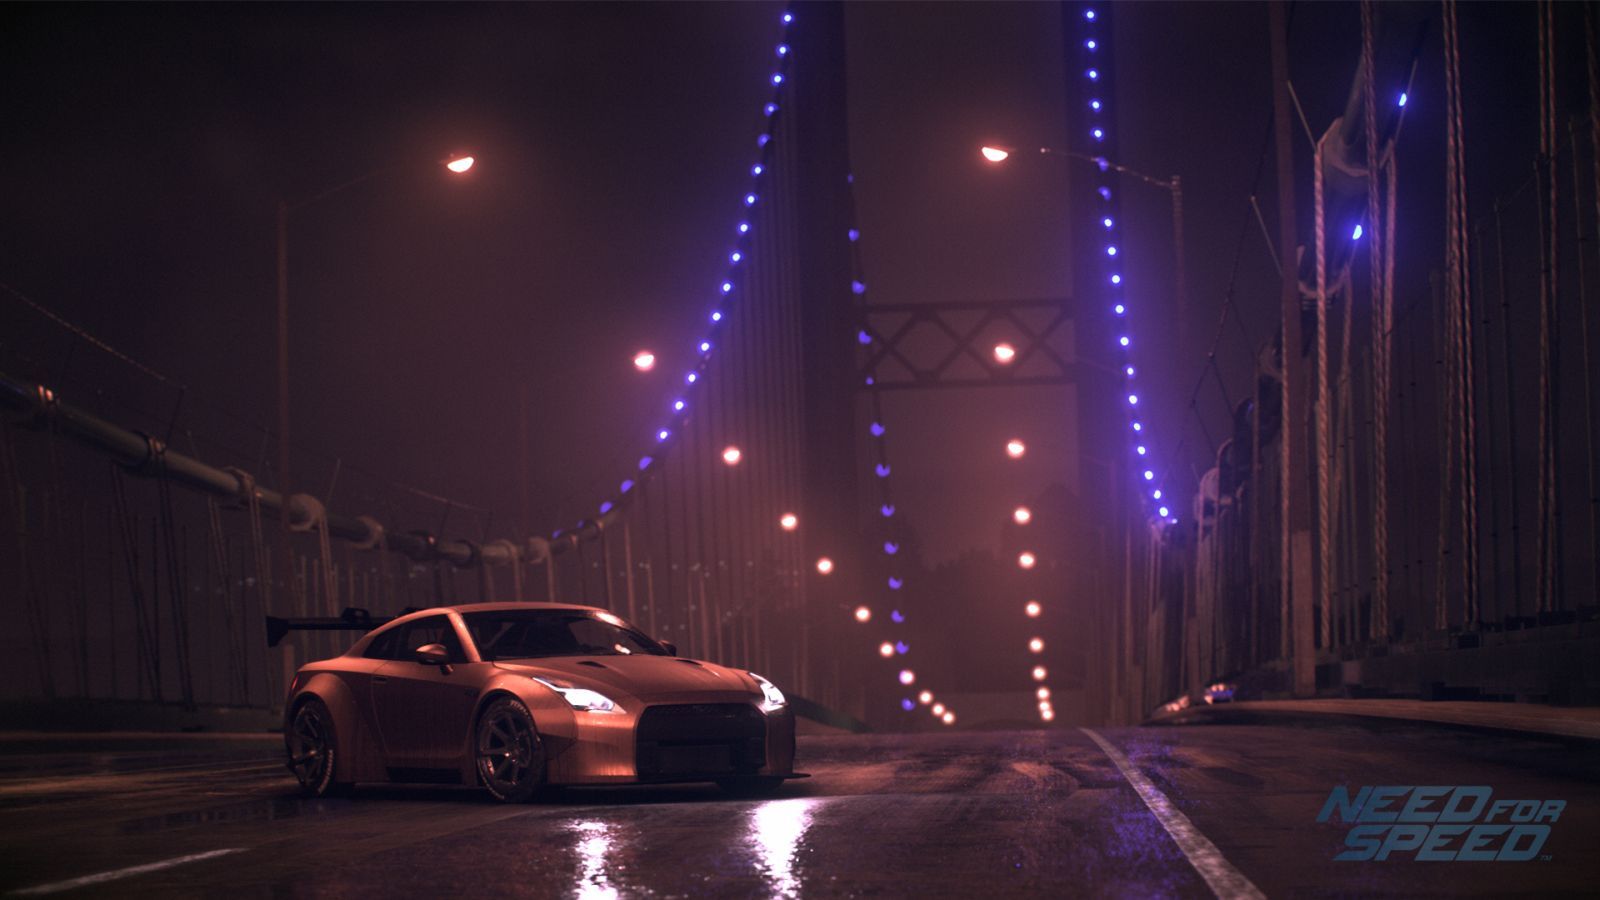 Need For Speed (2015) review: fast and forgettable